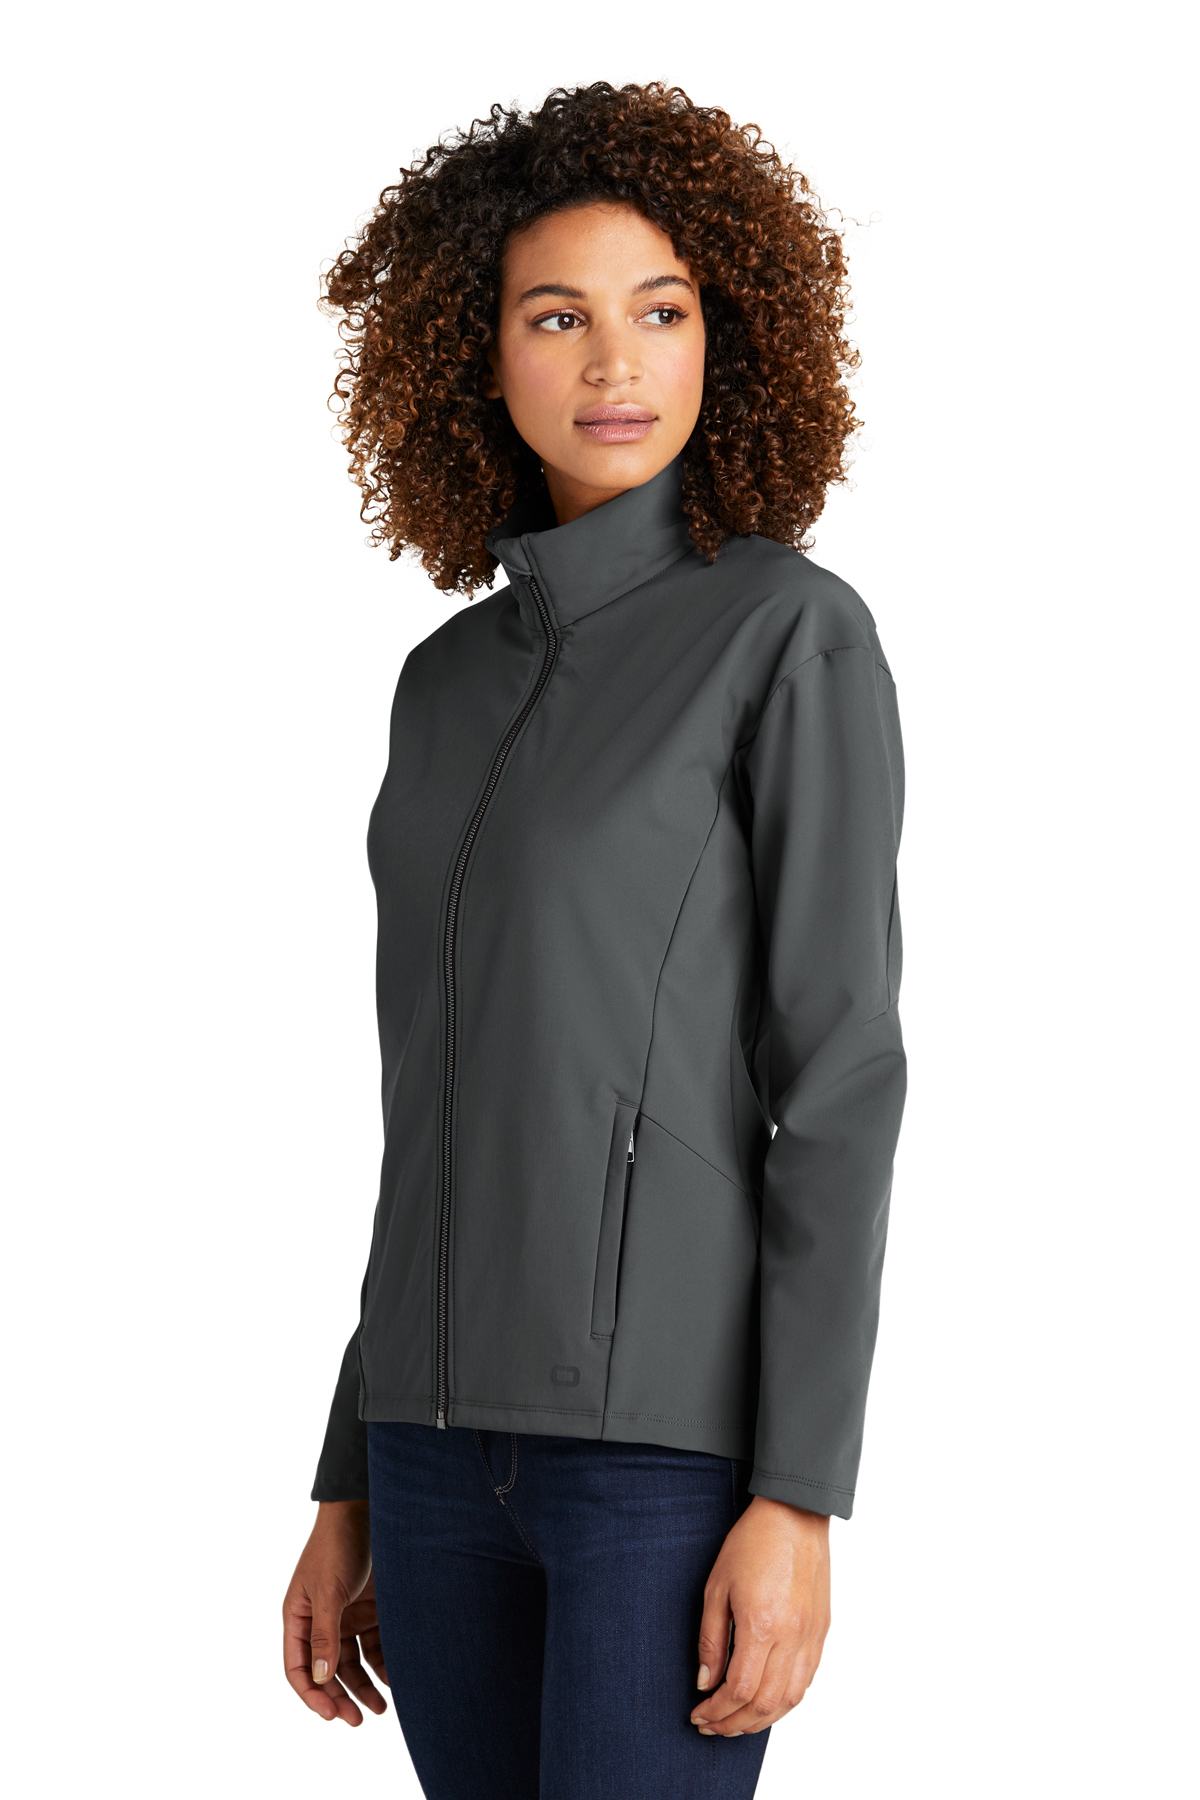 OGIO Ladies Commuter Full-Zip Soft Shell | Product | Company Casuals